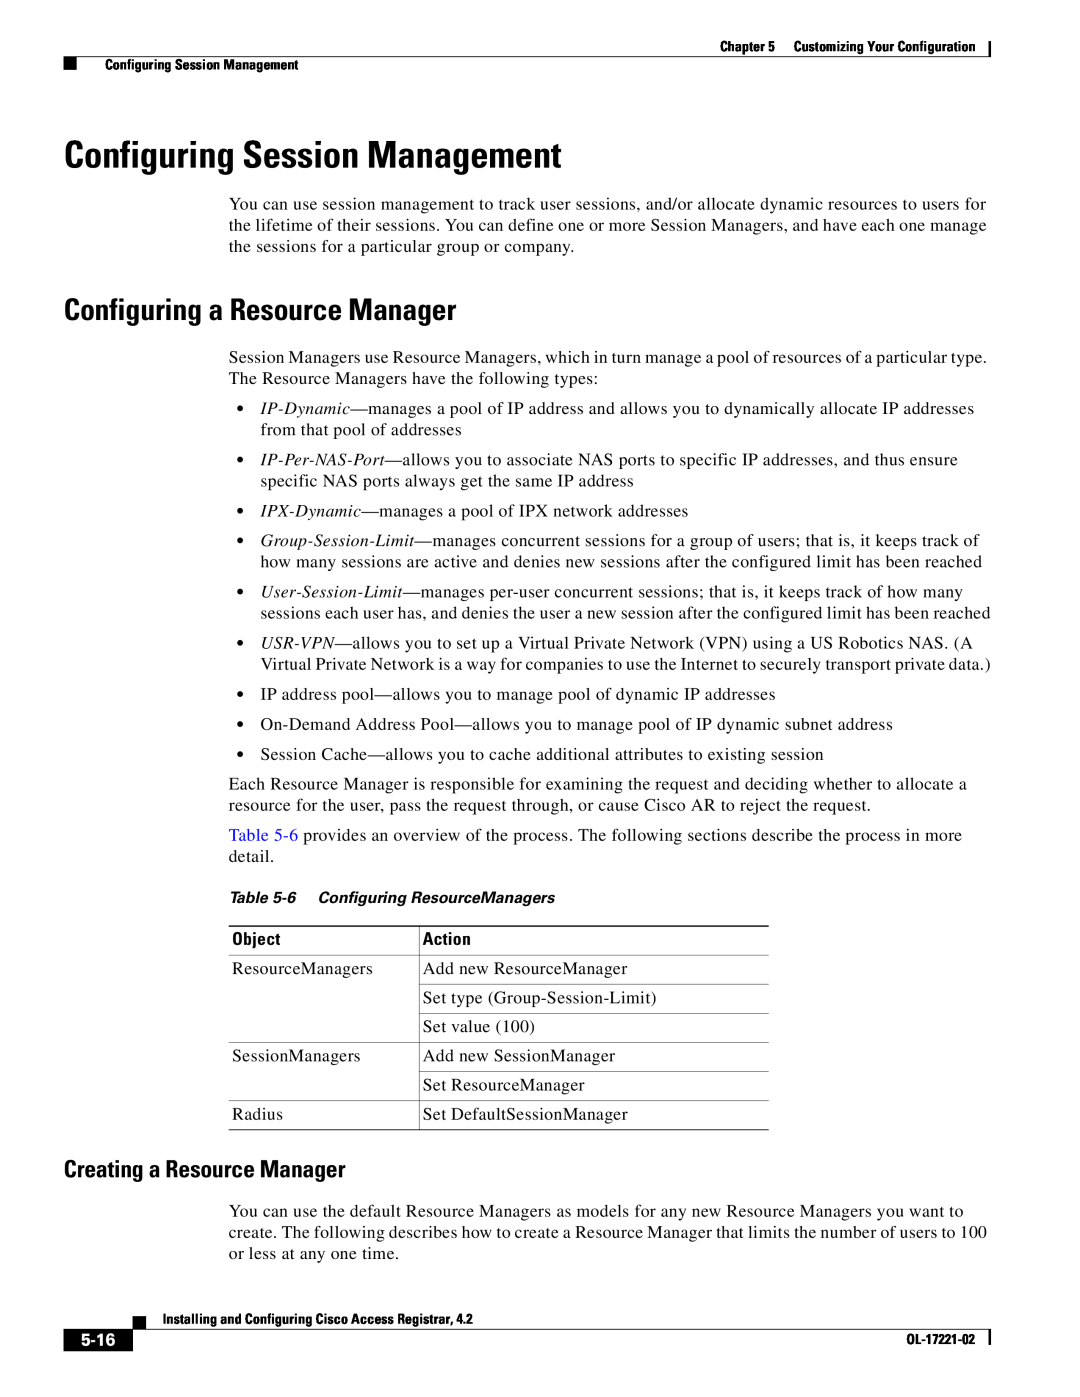 Cisco Systems 4.2 manual Configuring Session Management, Configuring a Resource Manager, Creating a Resource Manager, 5-16 